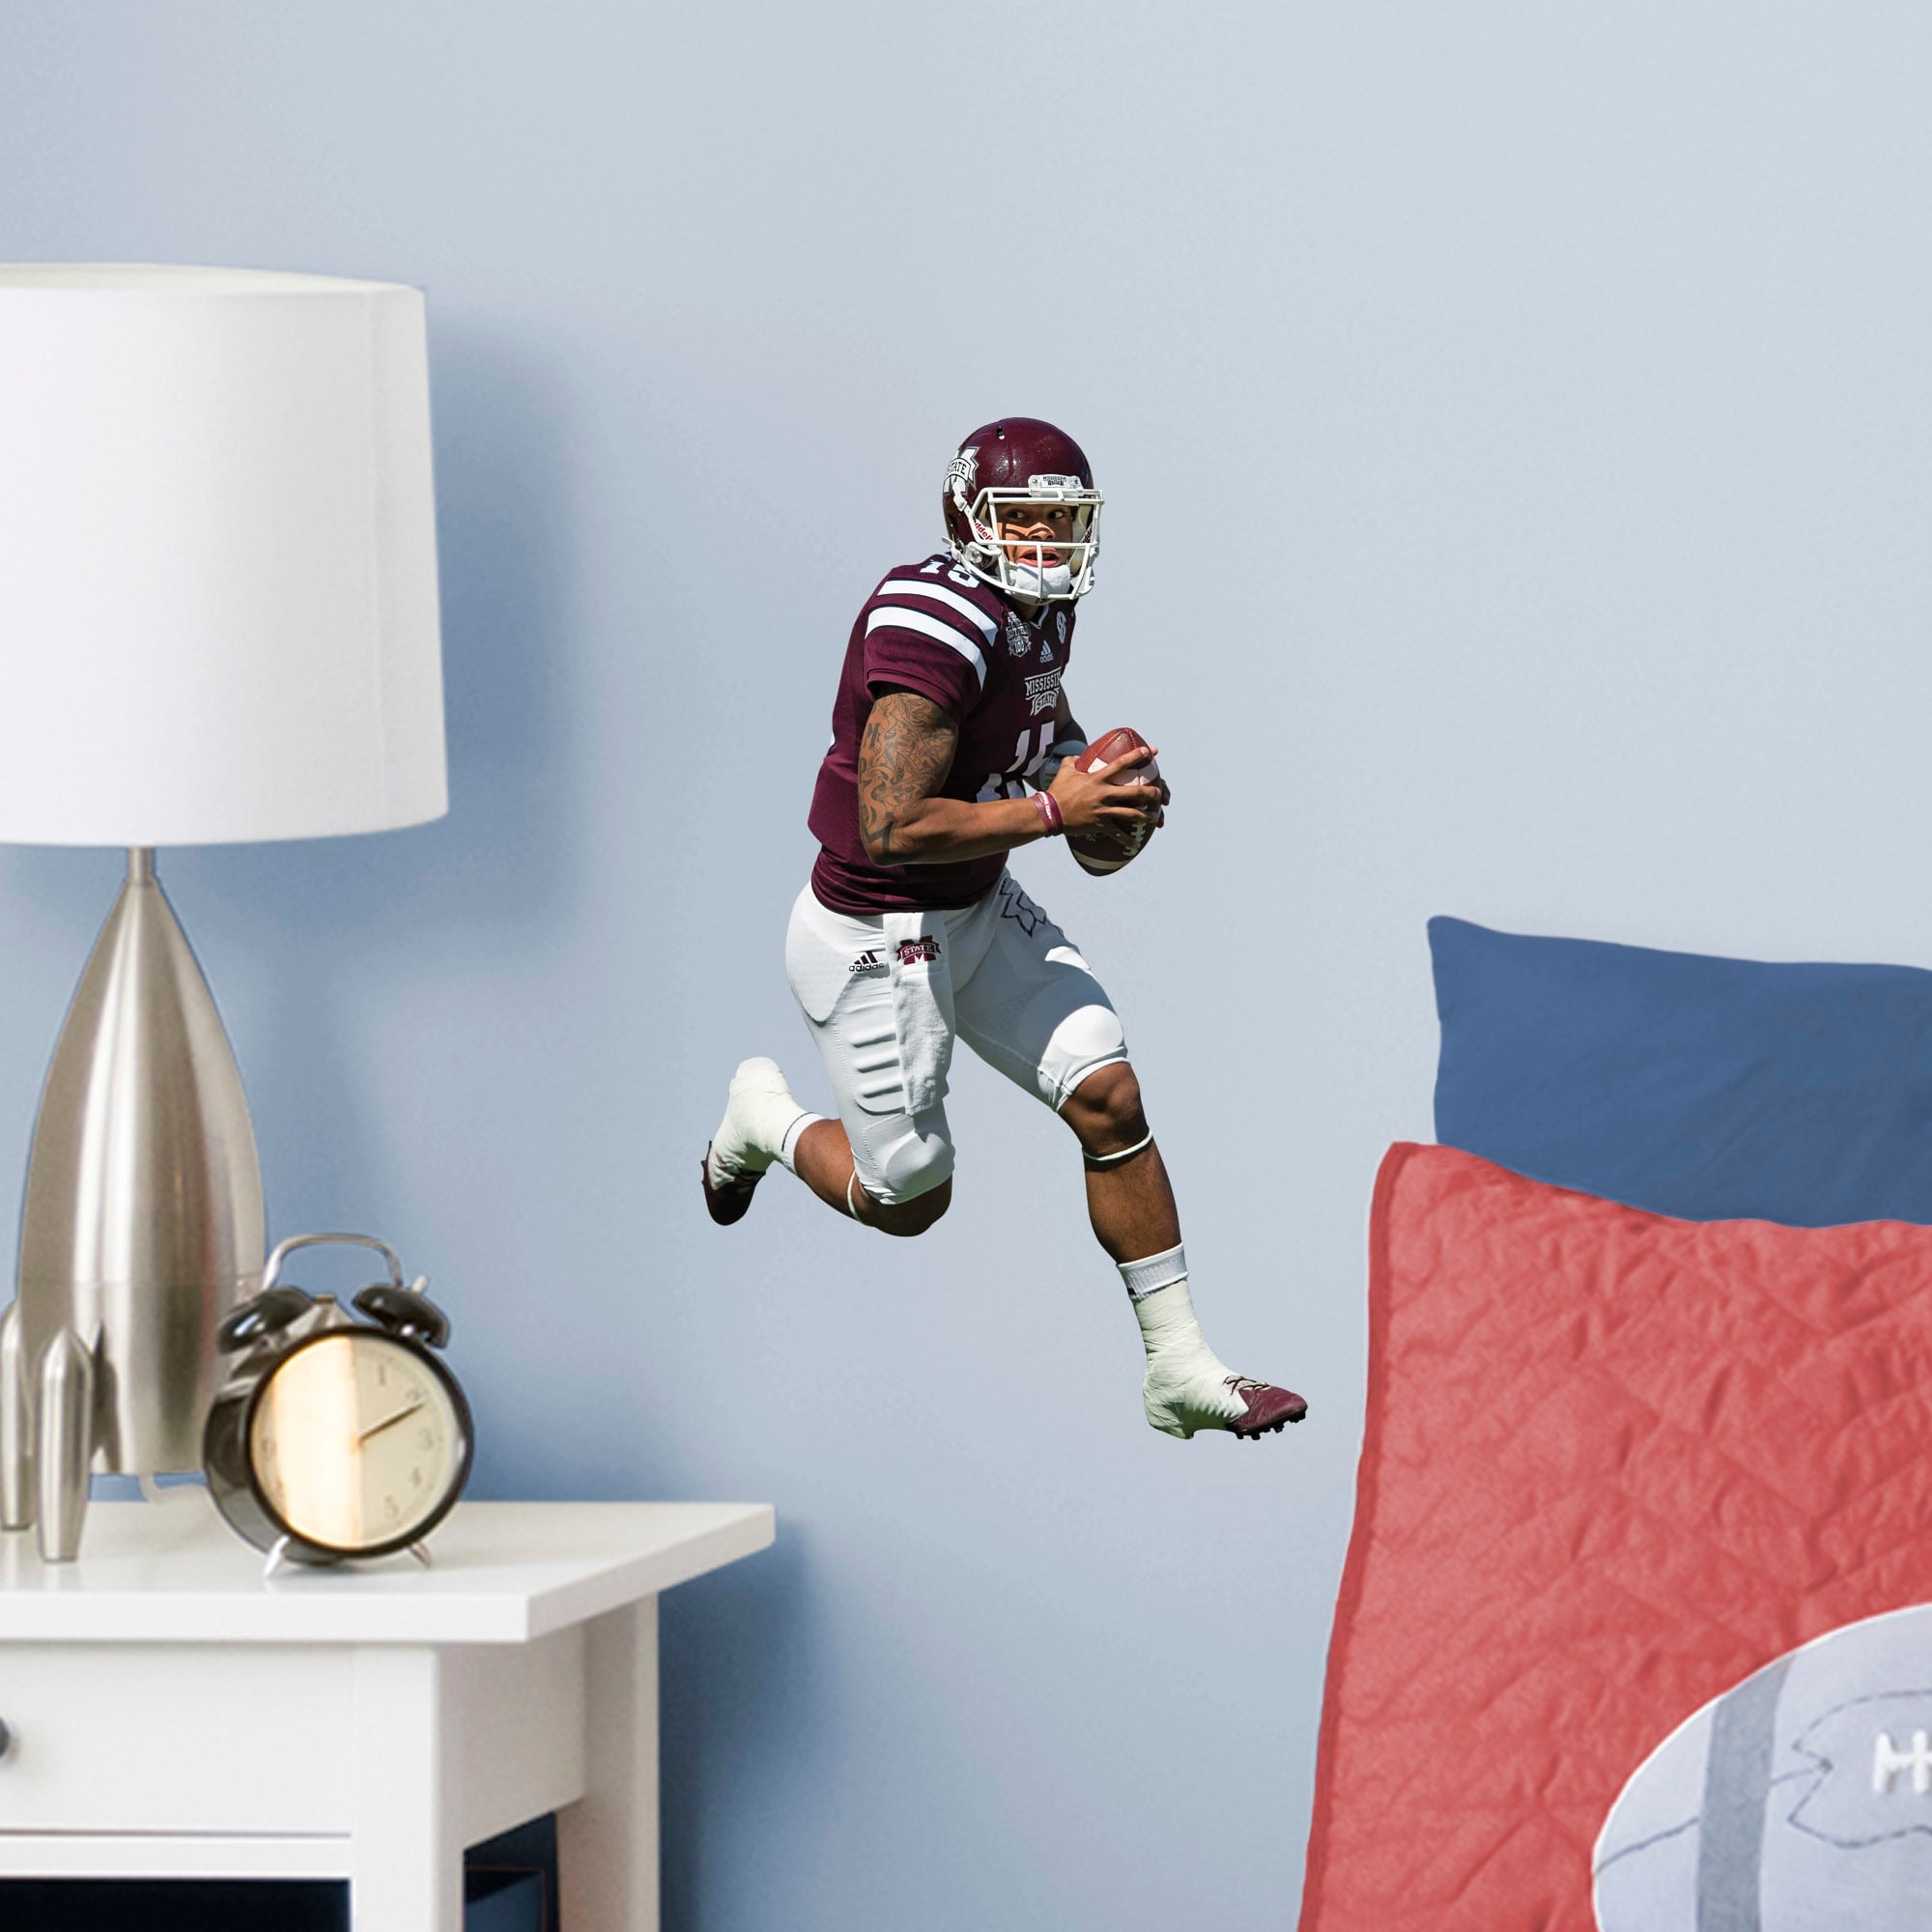 Dak Prescott for Mississippi State Bulldogs: Mississippi State - Officially Licensed Removable Wall Decal Large by Fathead | Vin